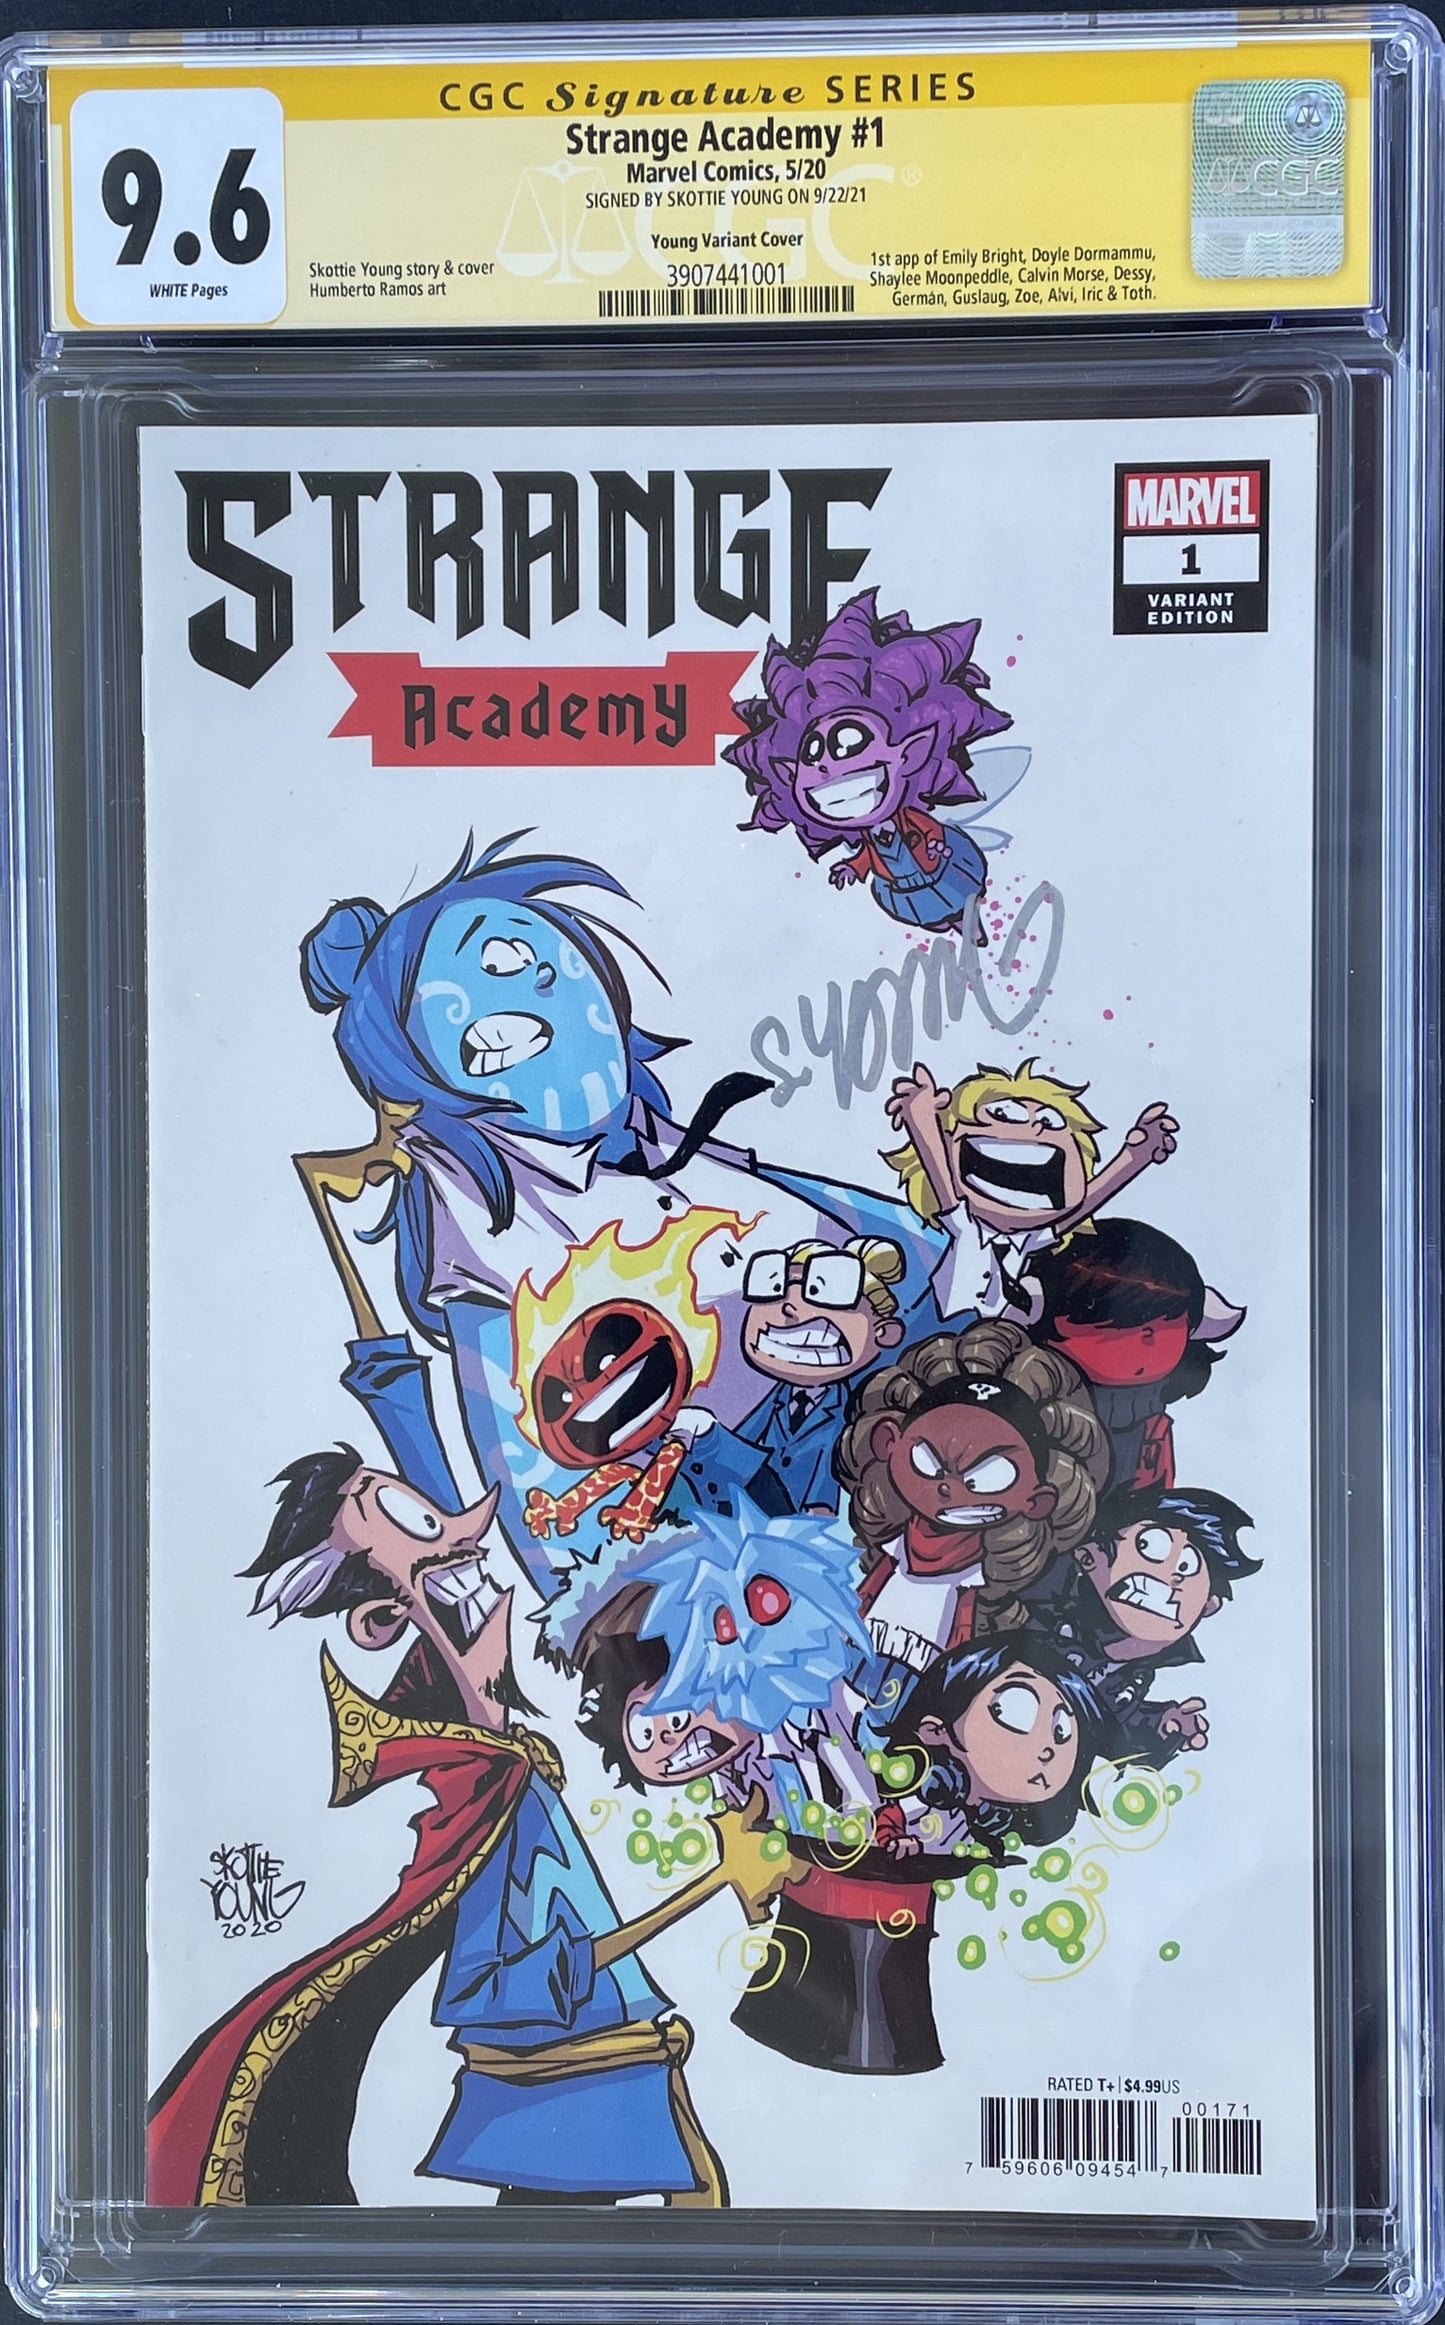 CGC Strange Academy #1 - Young Variant Cover - Signature Series (9.6)